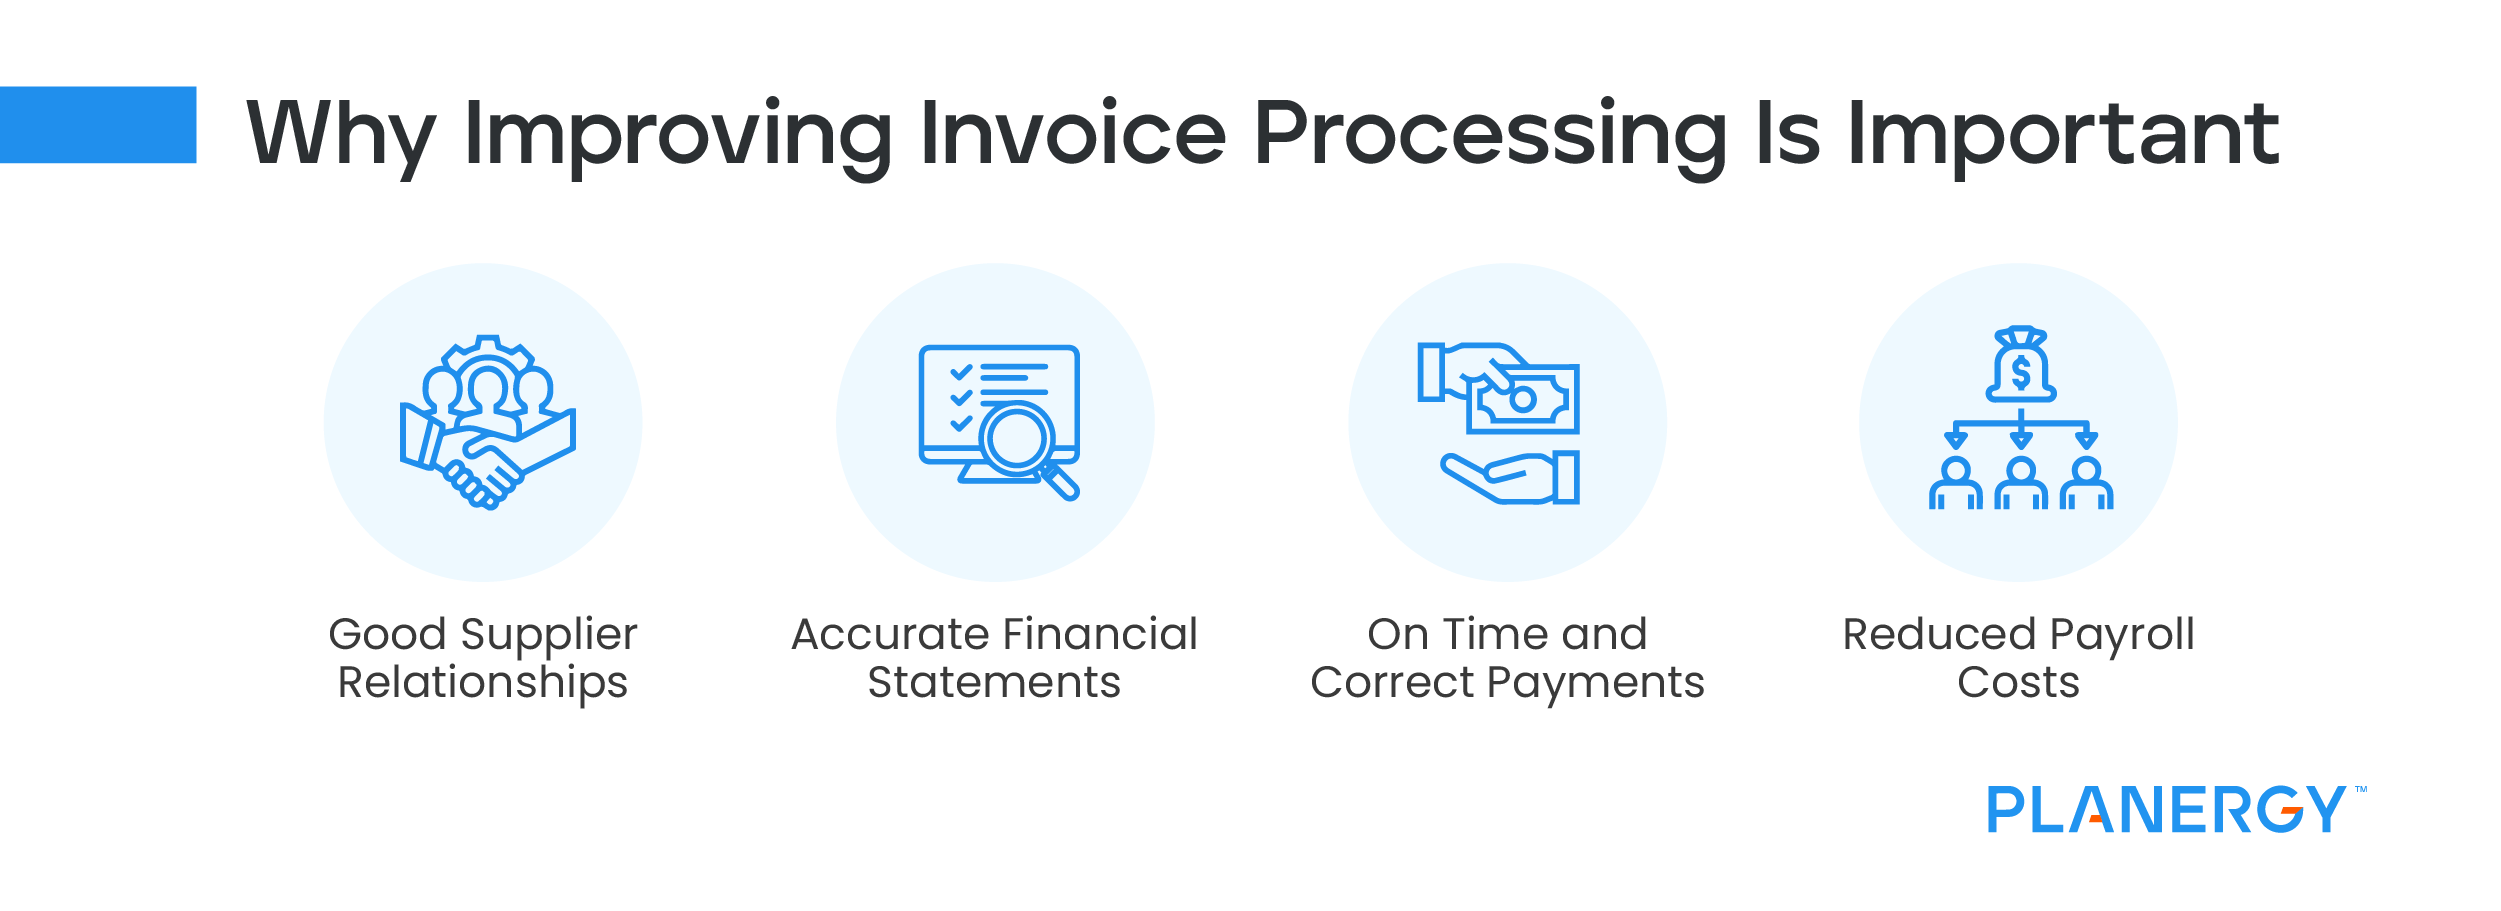 Why Improving Invoice Processing is Important